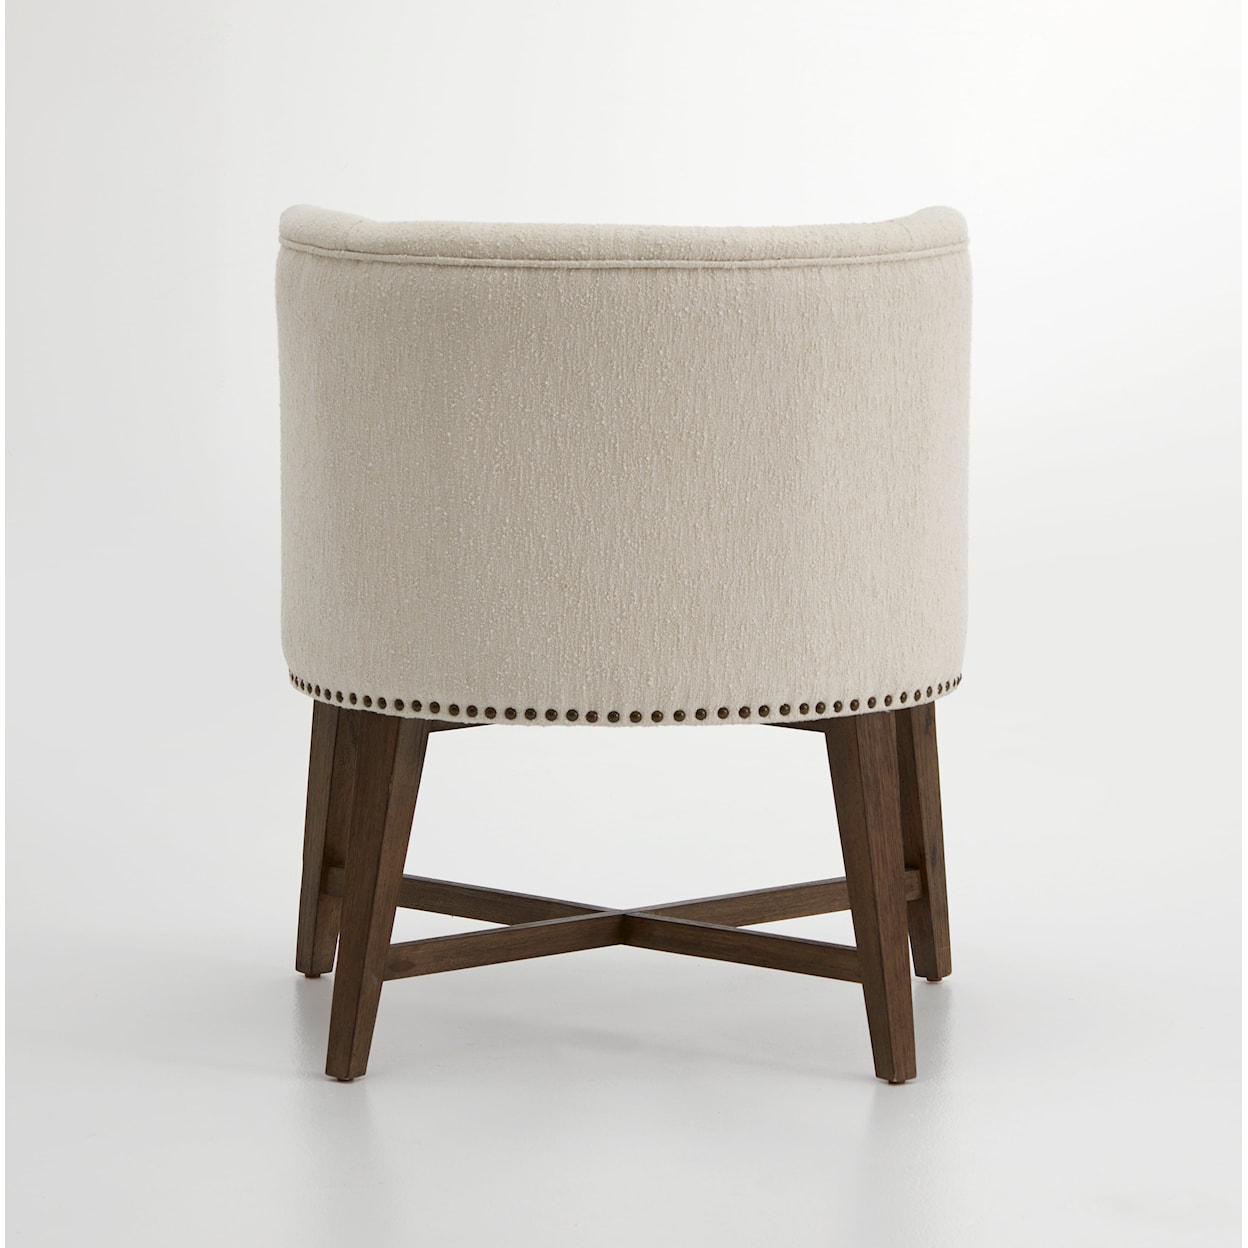 The Preserve Sugarland Dining Chair